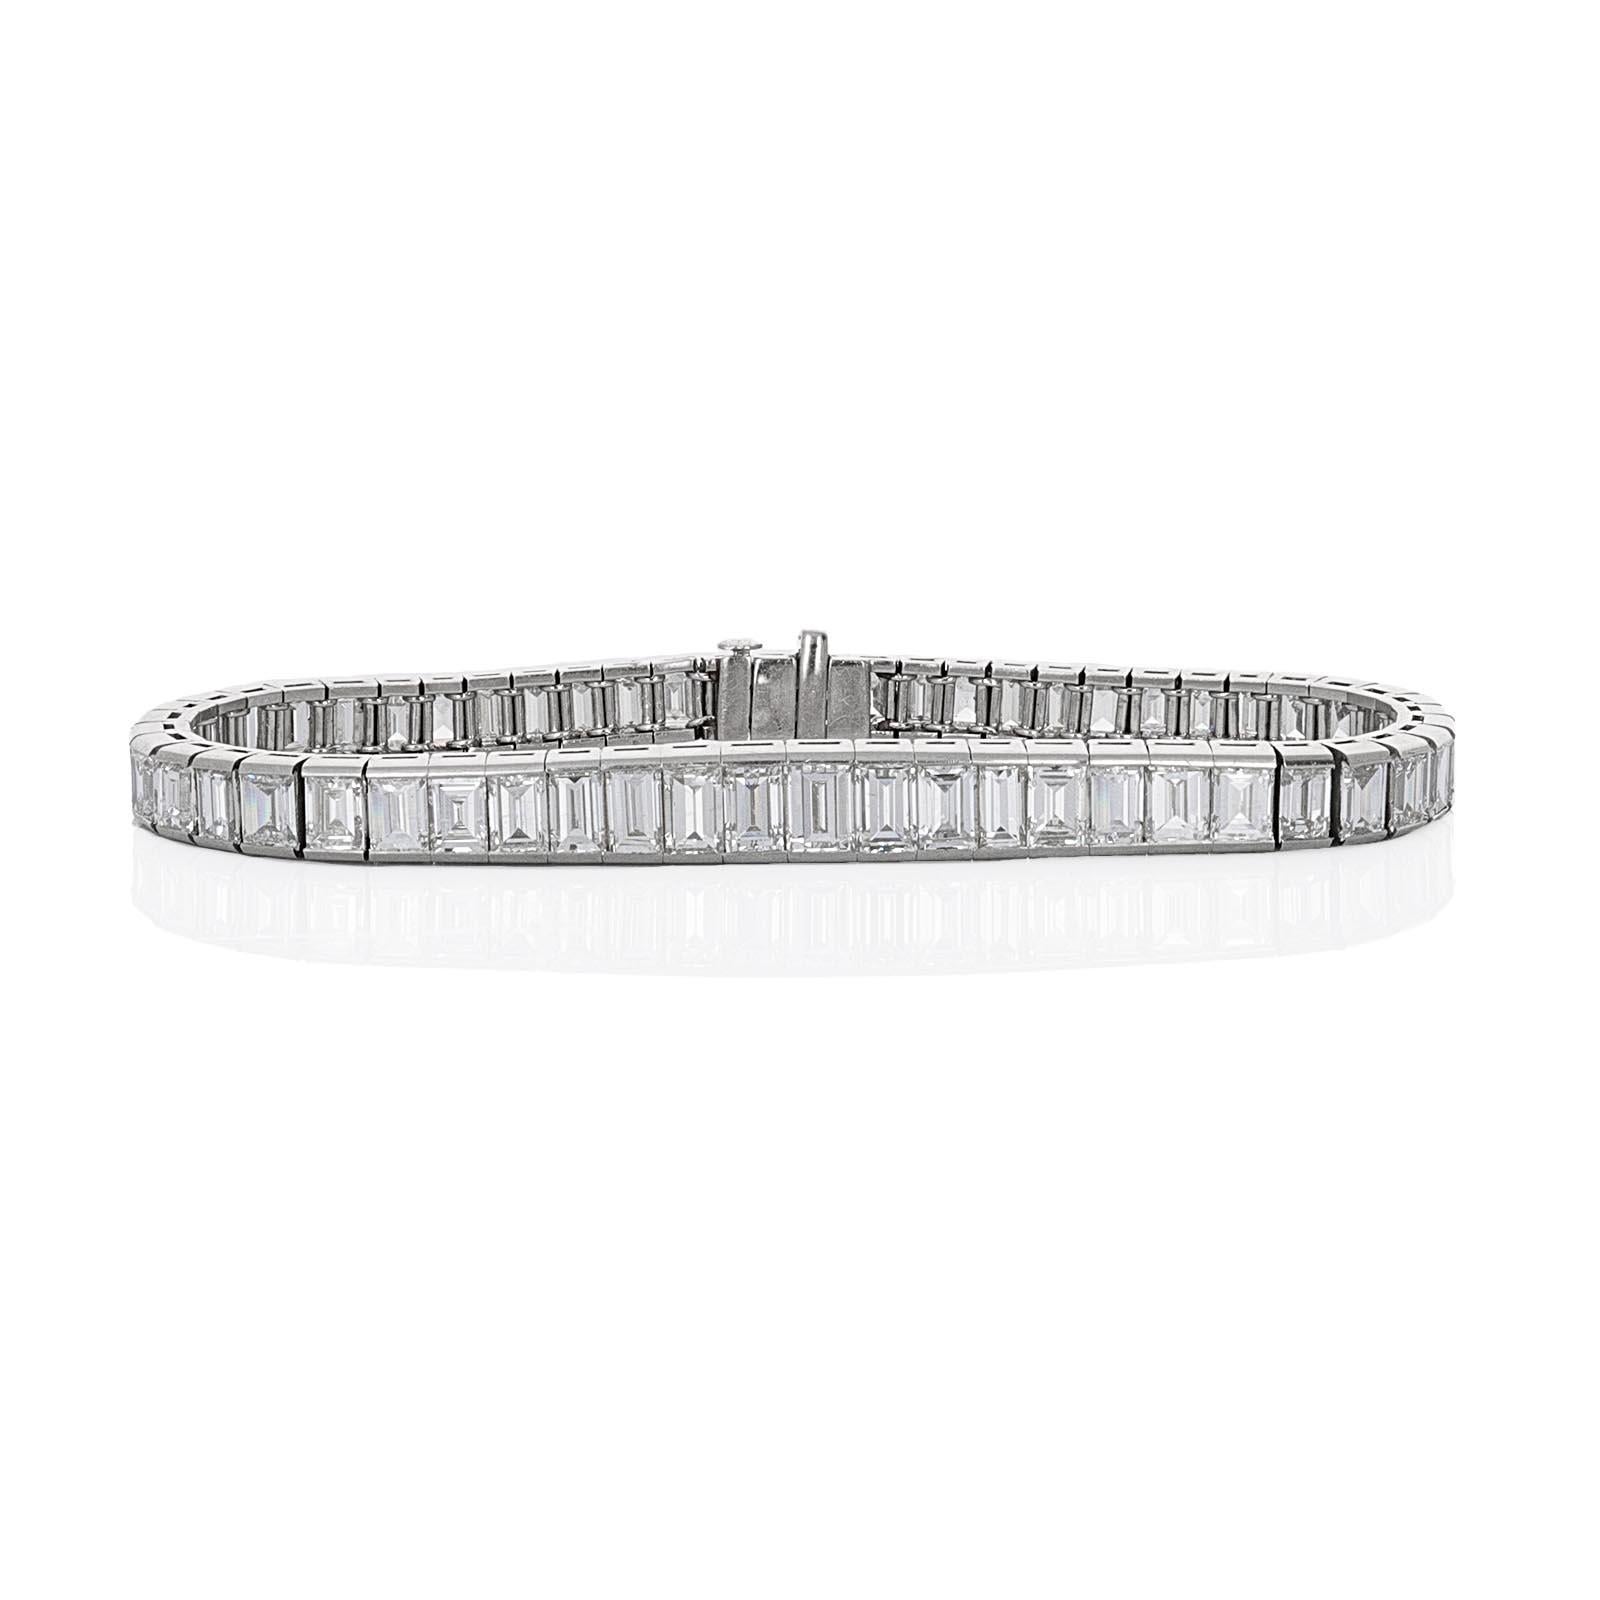 Harry Winston, 1950's, straight line emerald cut diamond platinum tennis bracelet. The bracelet was made beautifully and has been kept in pristine condition. There are a total of 56 emerald cut diamonds with a known weight of 15.47 carats. The